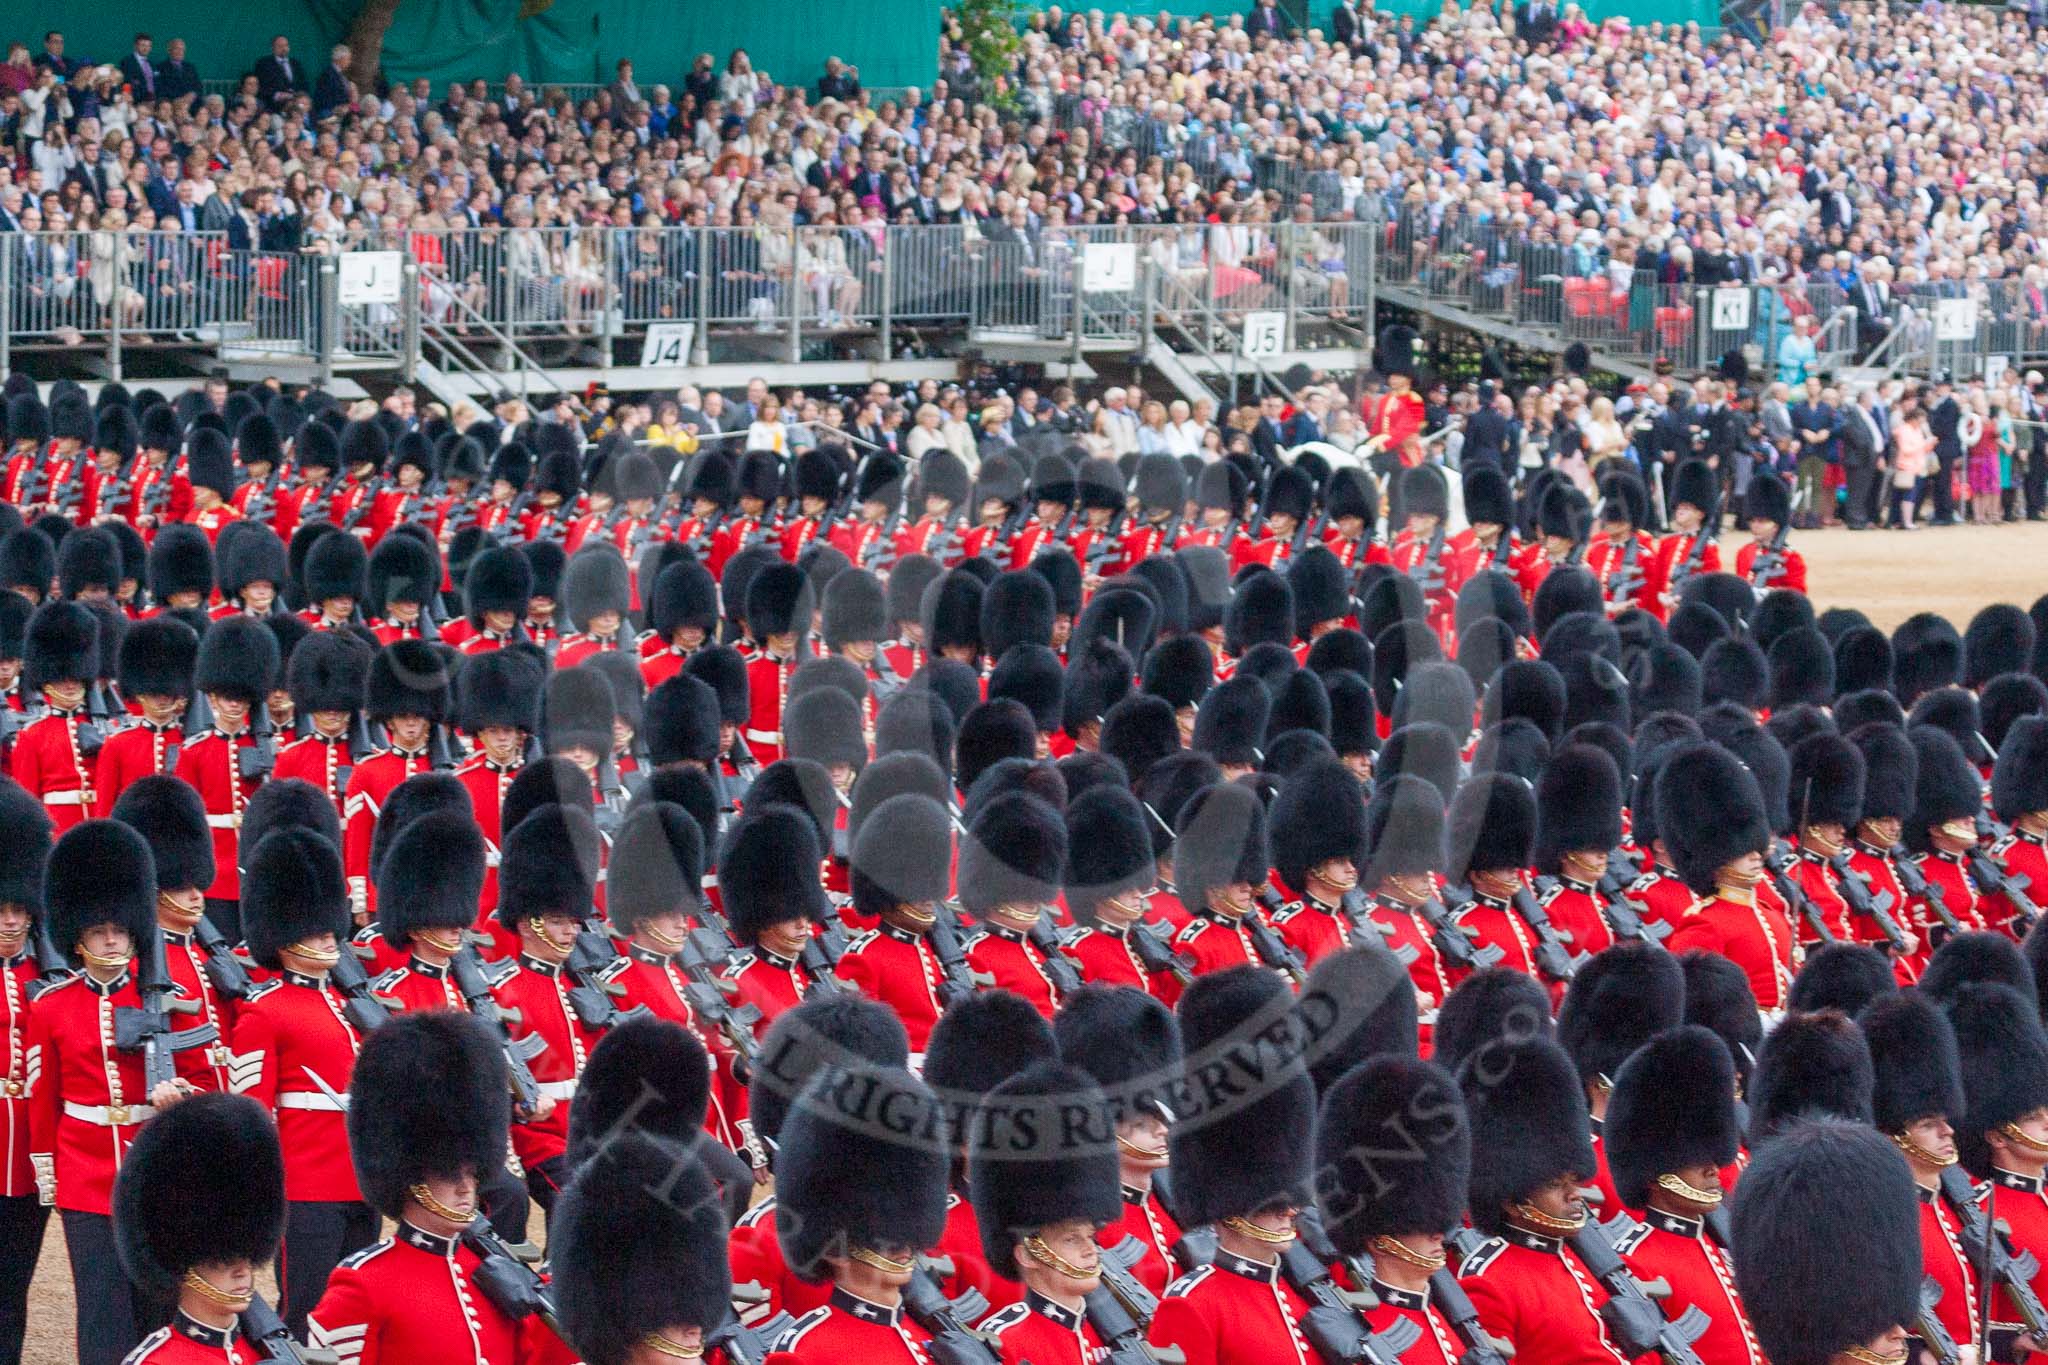 Trooping the Colour 2015. Image #459, 13 June 2015 11:35 Horse Guards Parade, London, UK